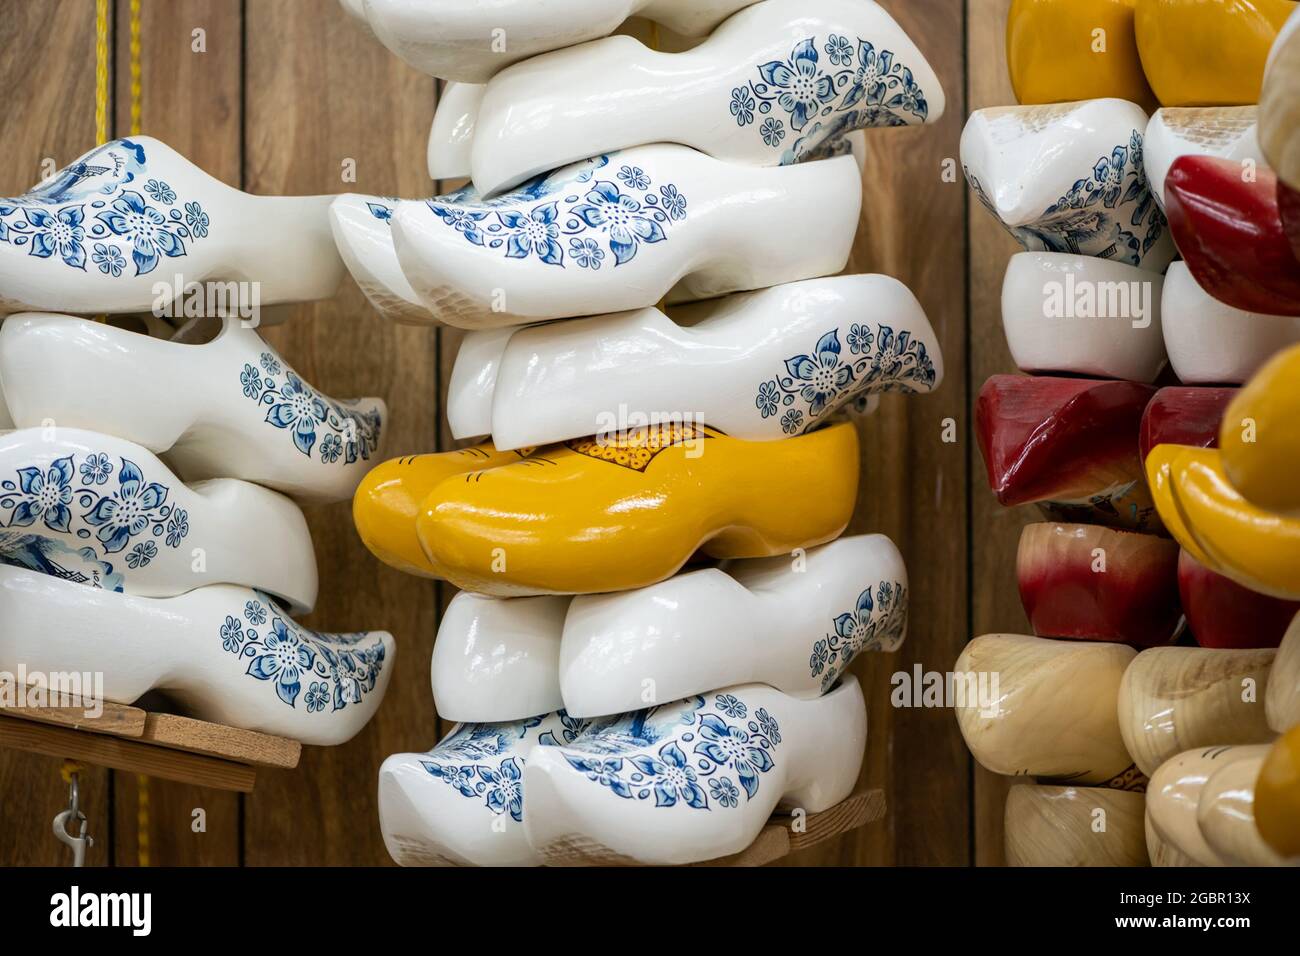 Display of wooden shoes at De Klomp Wooden Shoe and Delft Factory, in Holland, Michigan. Stock Photo